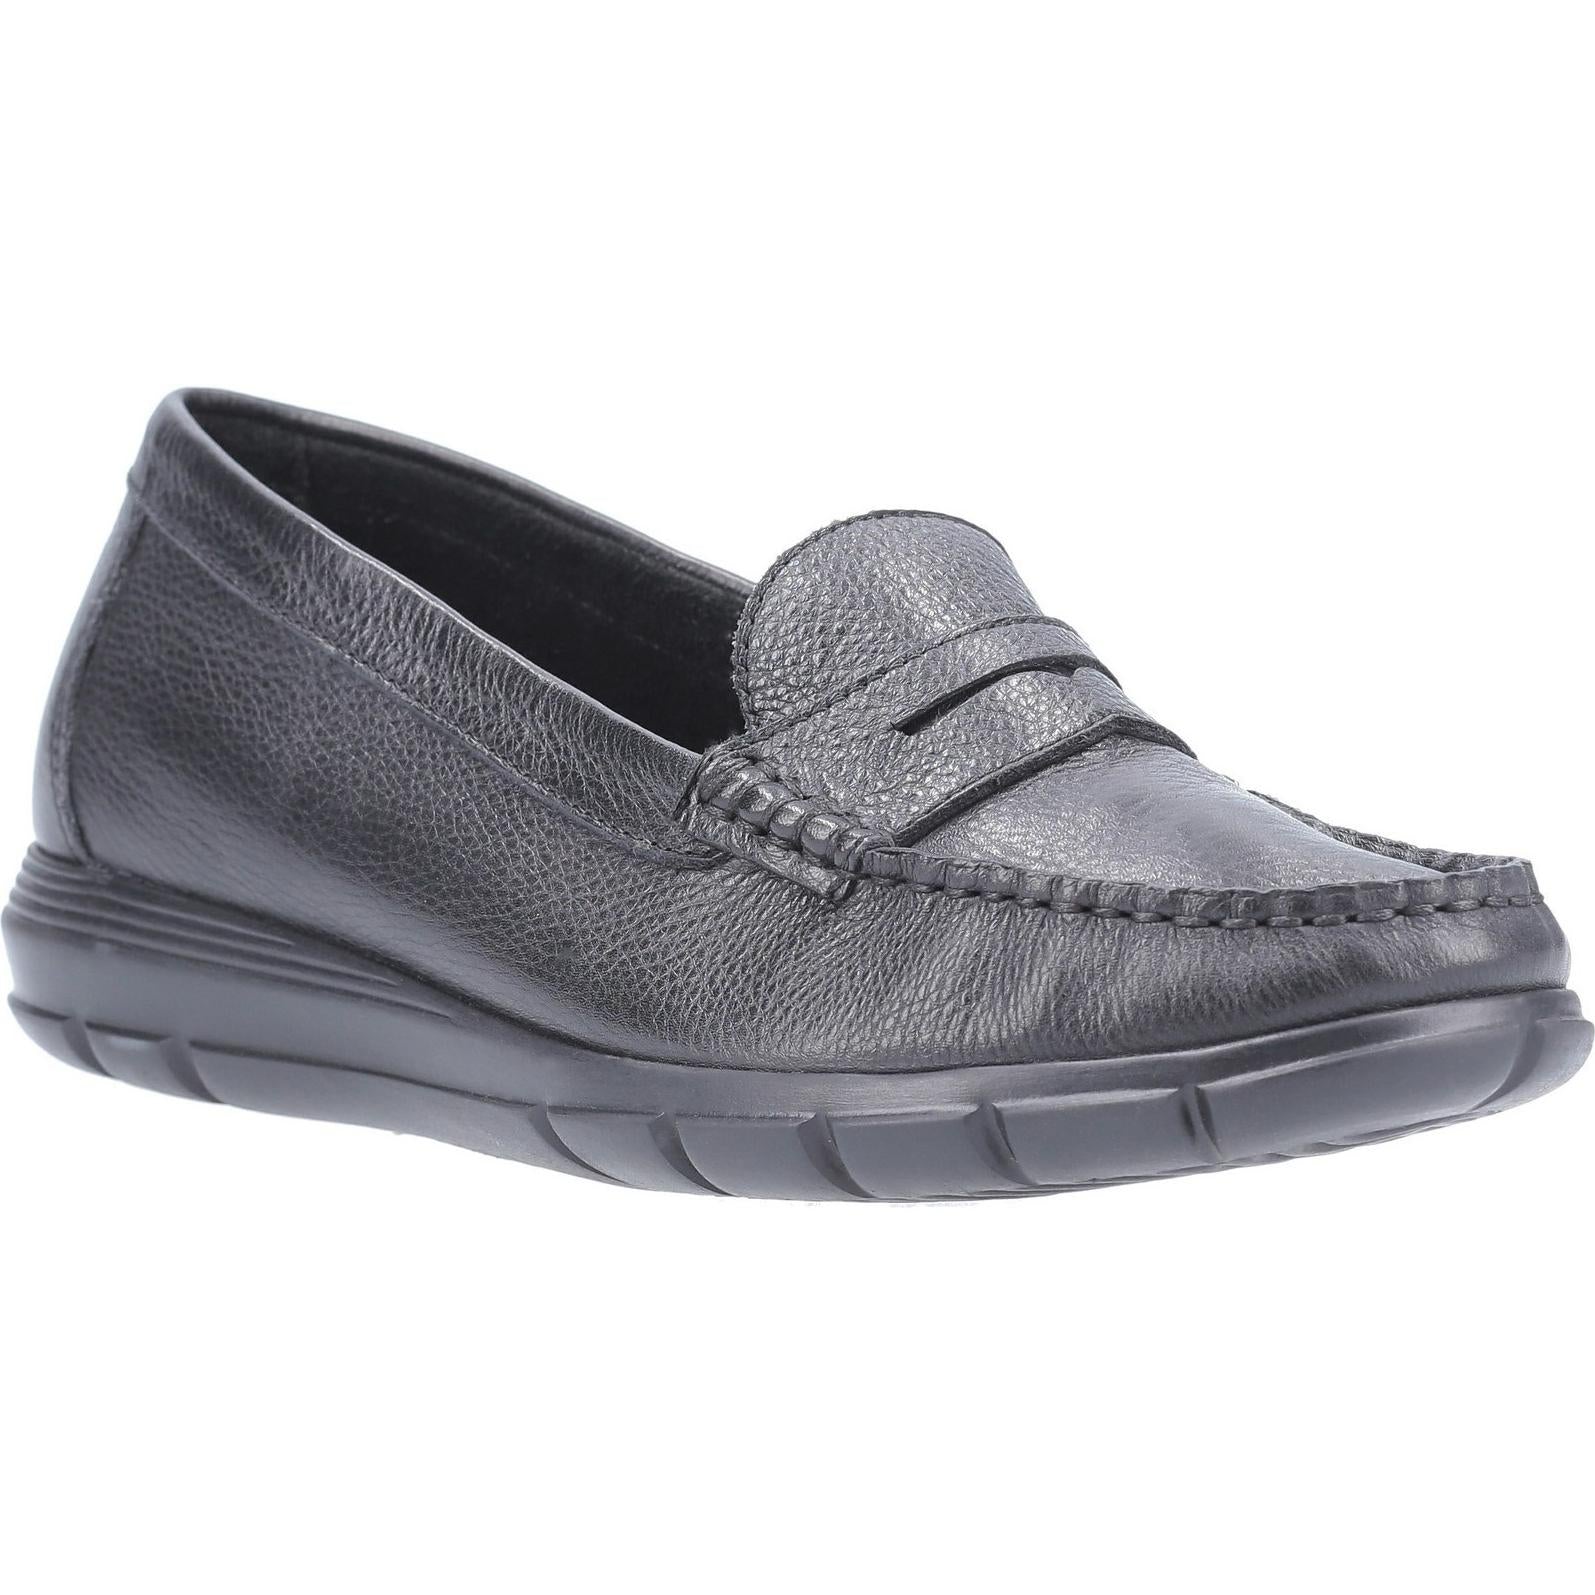 Hush Puppies Paige Slip On Shoes